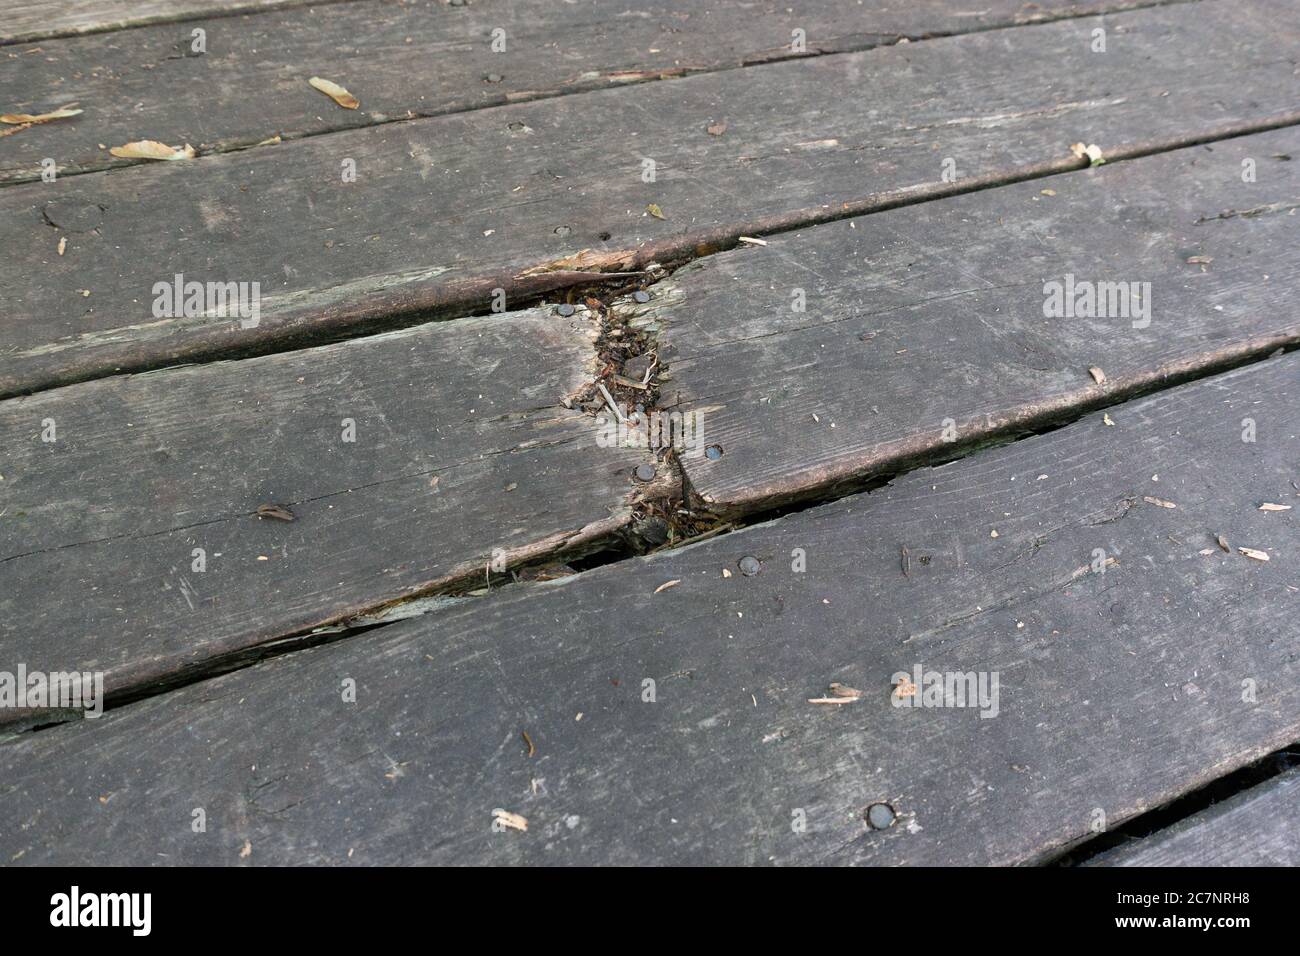 Weathered wooden deck with rotting sections in need of repair or replacement. Stock Photo